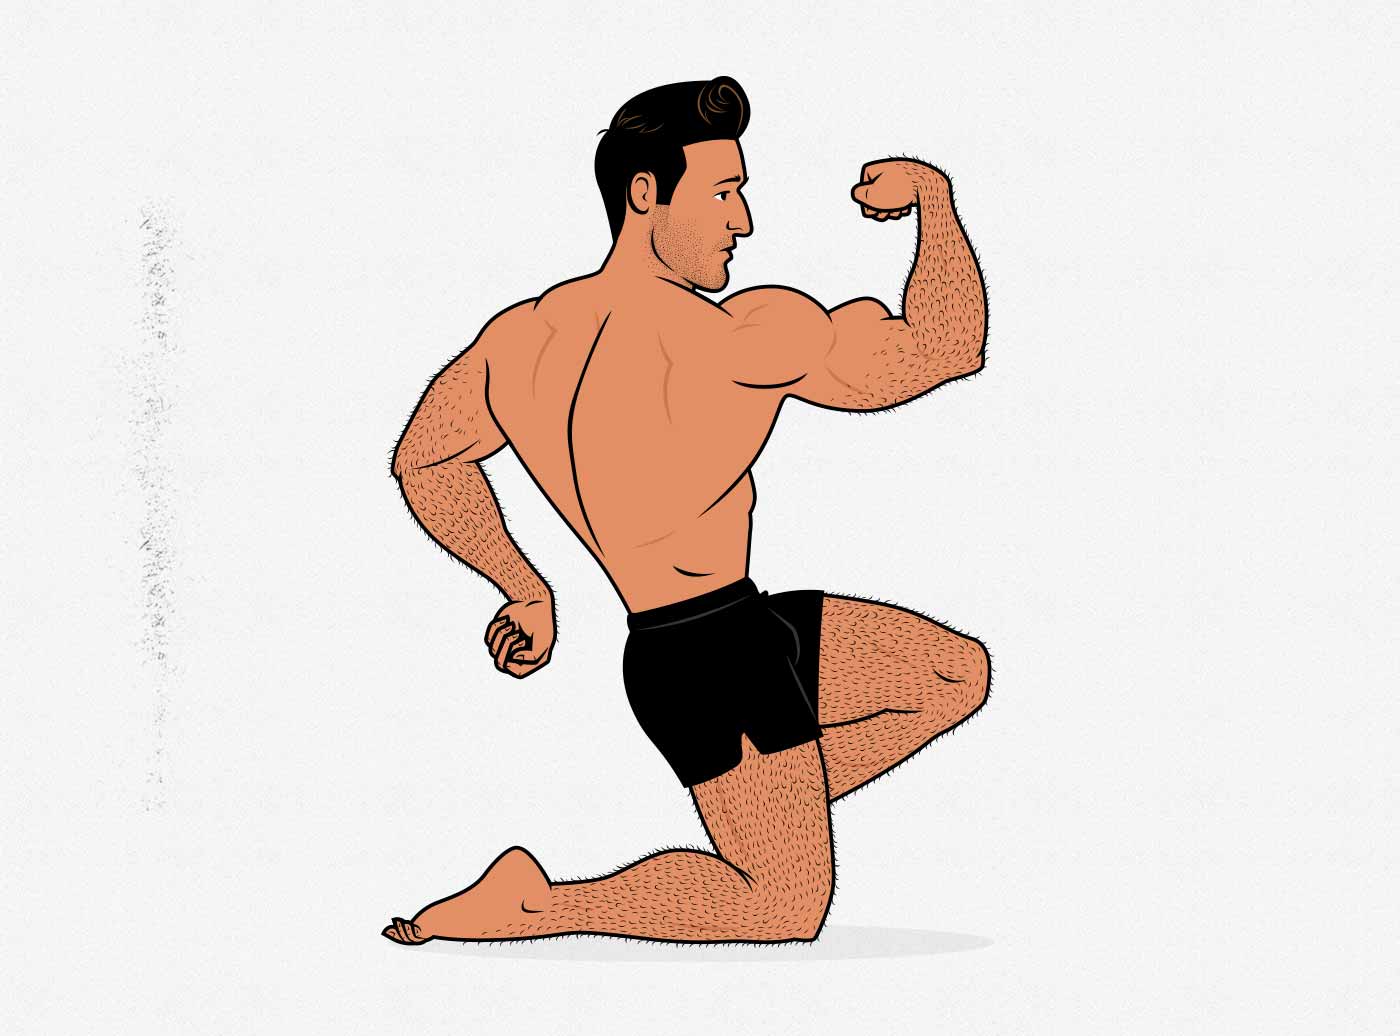 Illustration of a bodybuilder flexing his muscles.